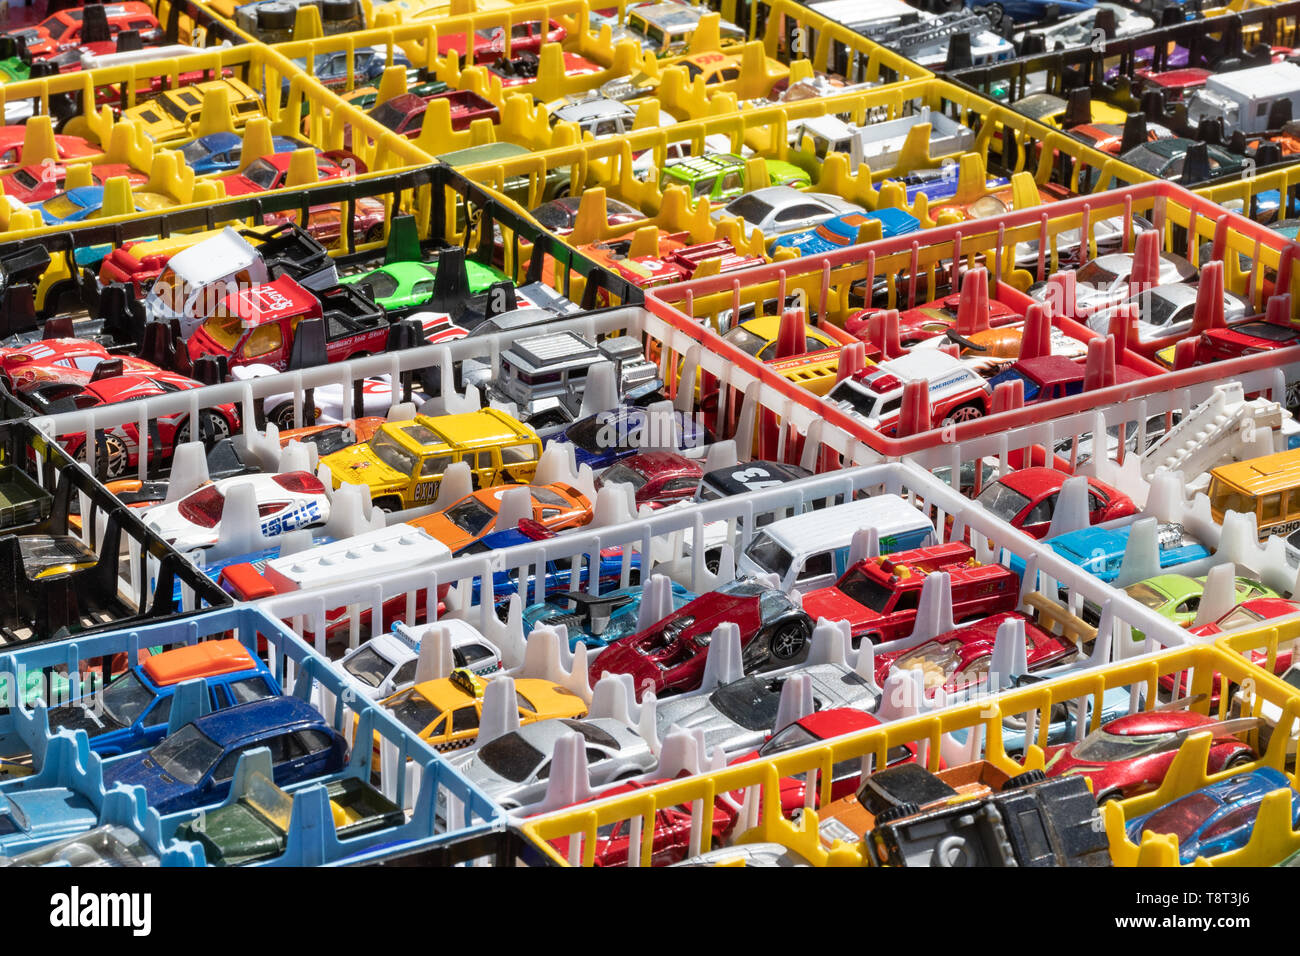 Toy cars in plastic trays on sale on a stall at a car show, UK Stock Photo